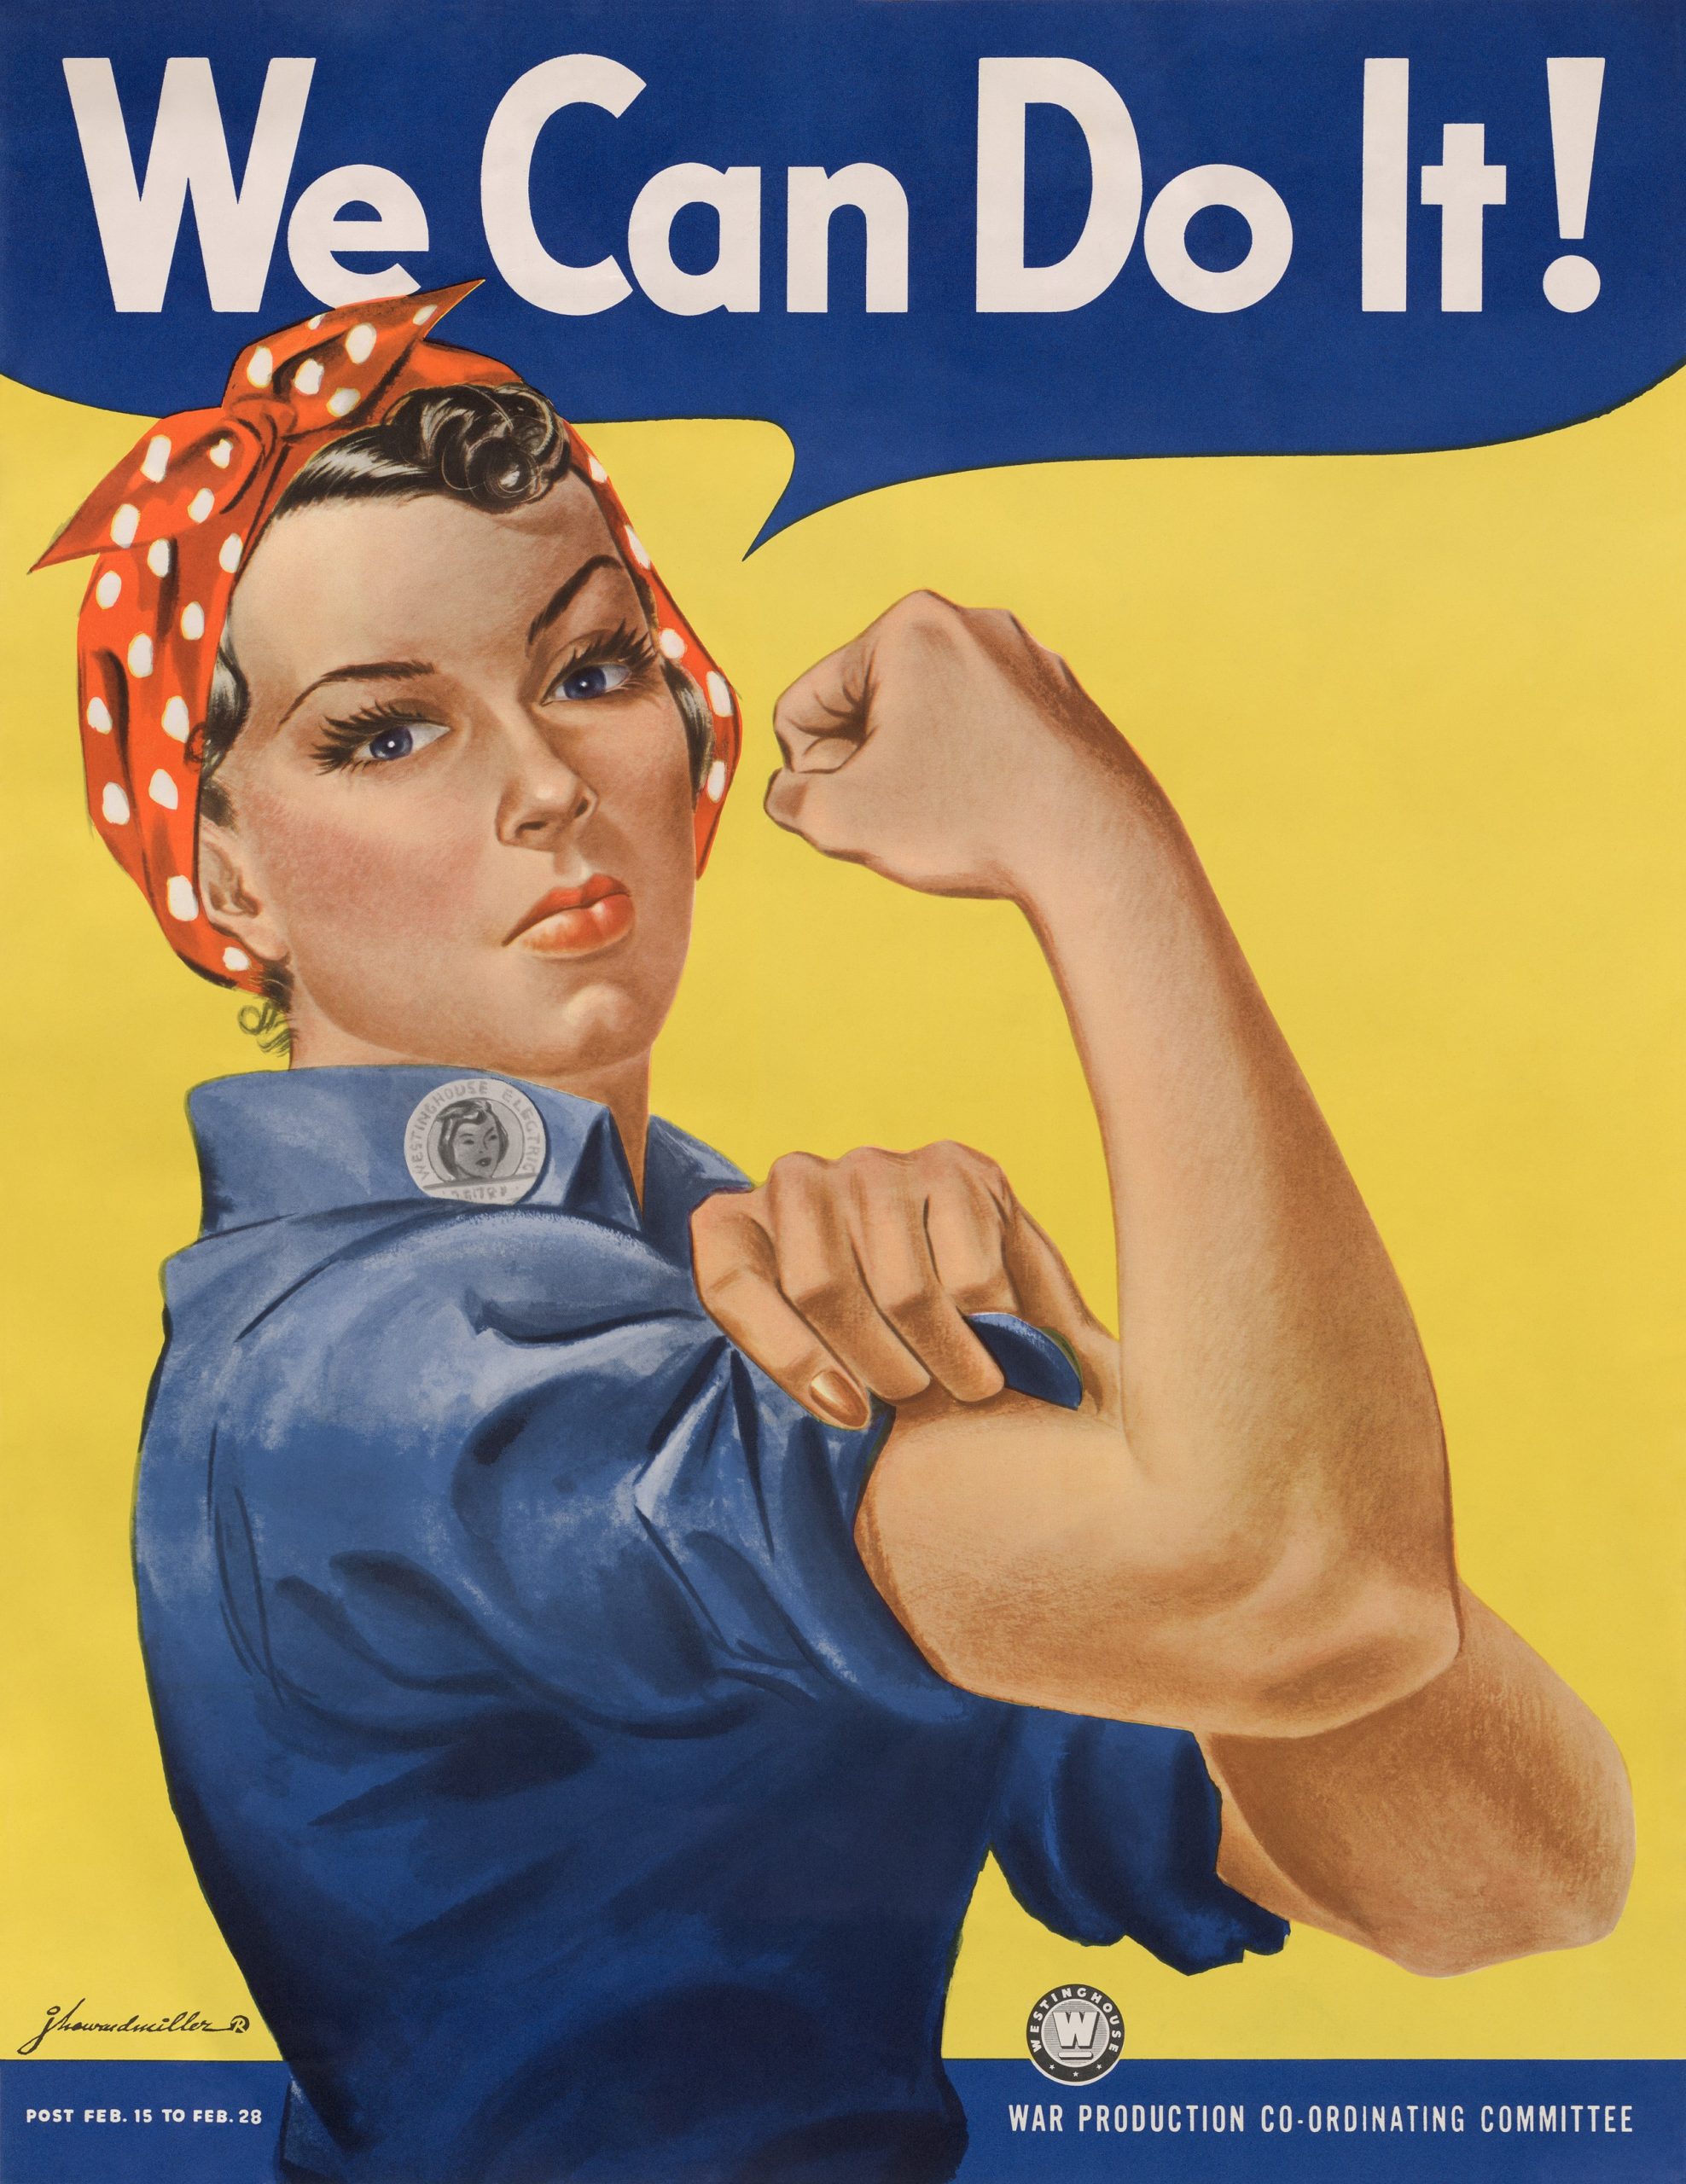 J. Howard Miller's "We Can Do It!" poster from 1943